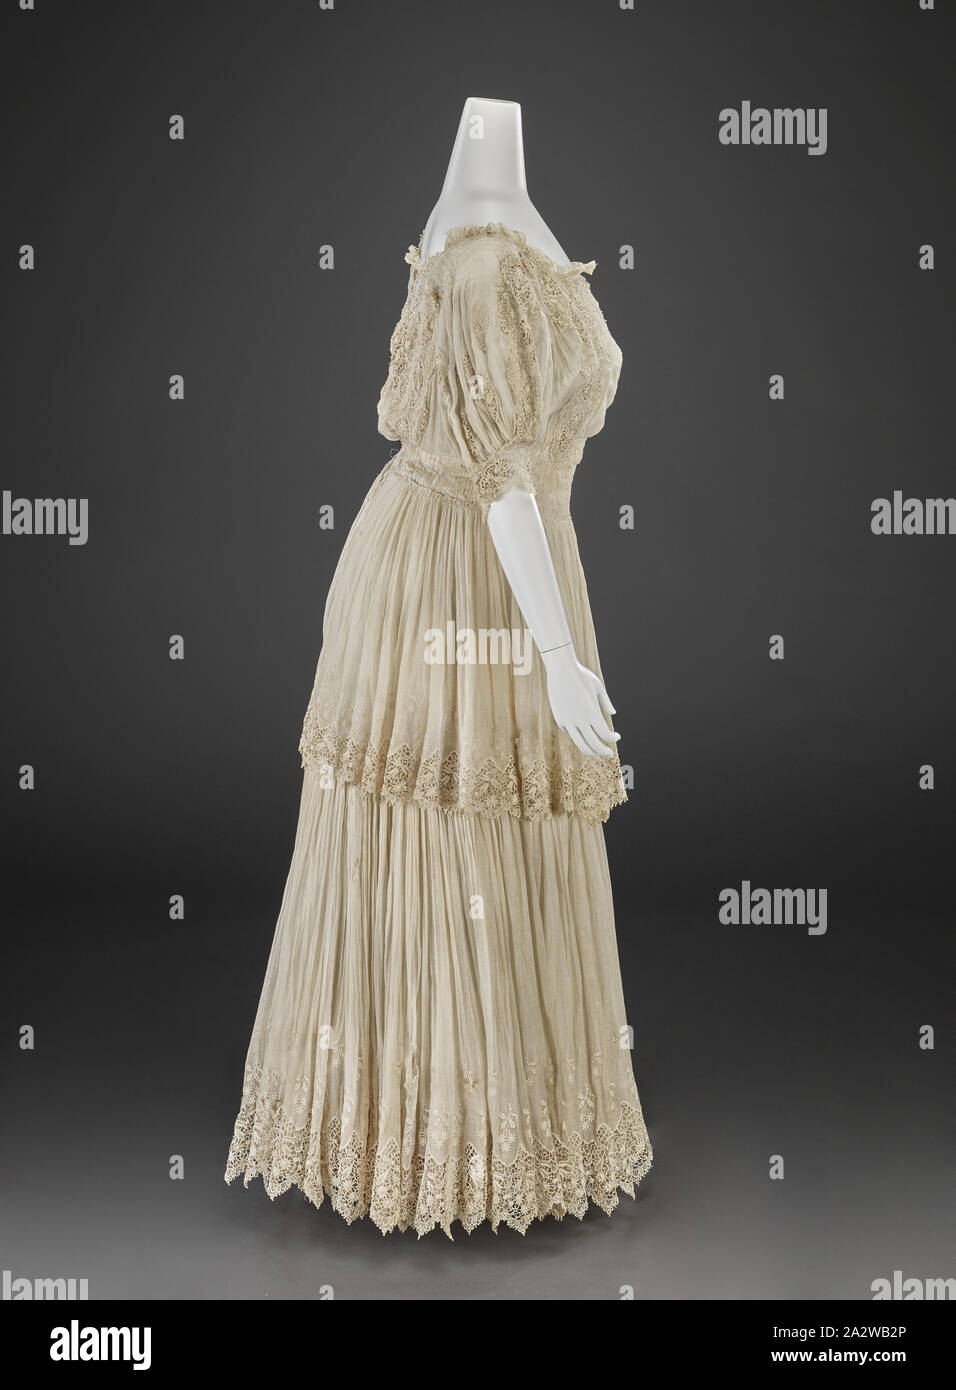 dress, Unknown, about 1906, cotton, center back 51 in., center front 46 in., bust 30 in., waist 24 in., hips 32 in., sleeve length 11 in., shoulders 16-1/2 in., American, Textile and Fashion Arts Stock Photo